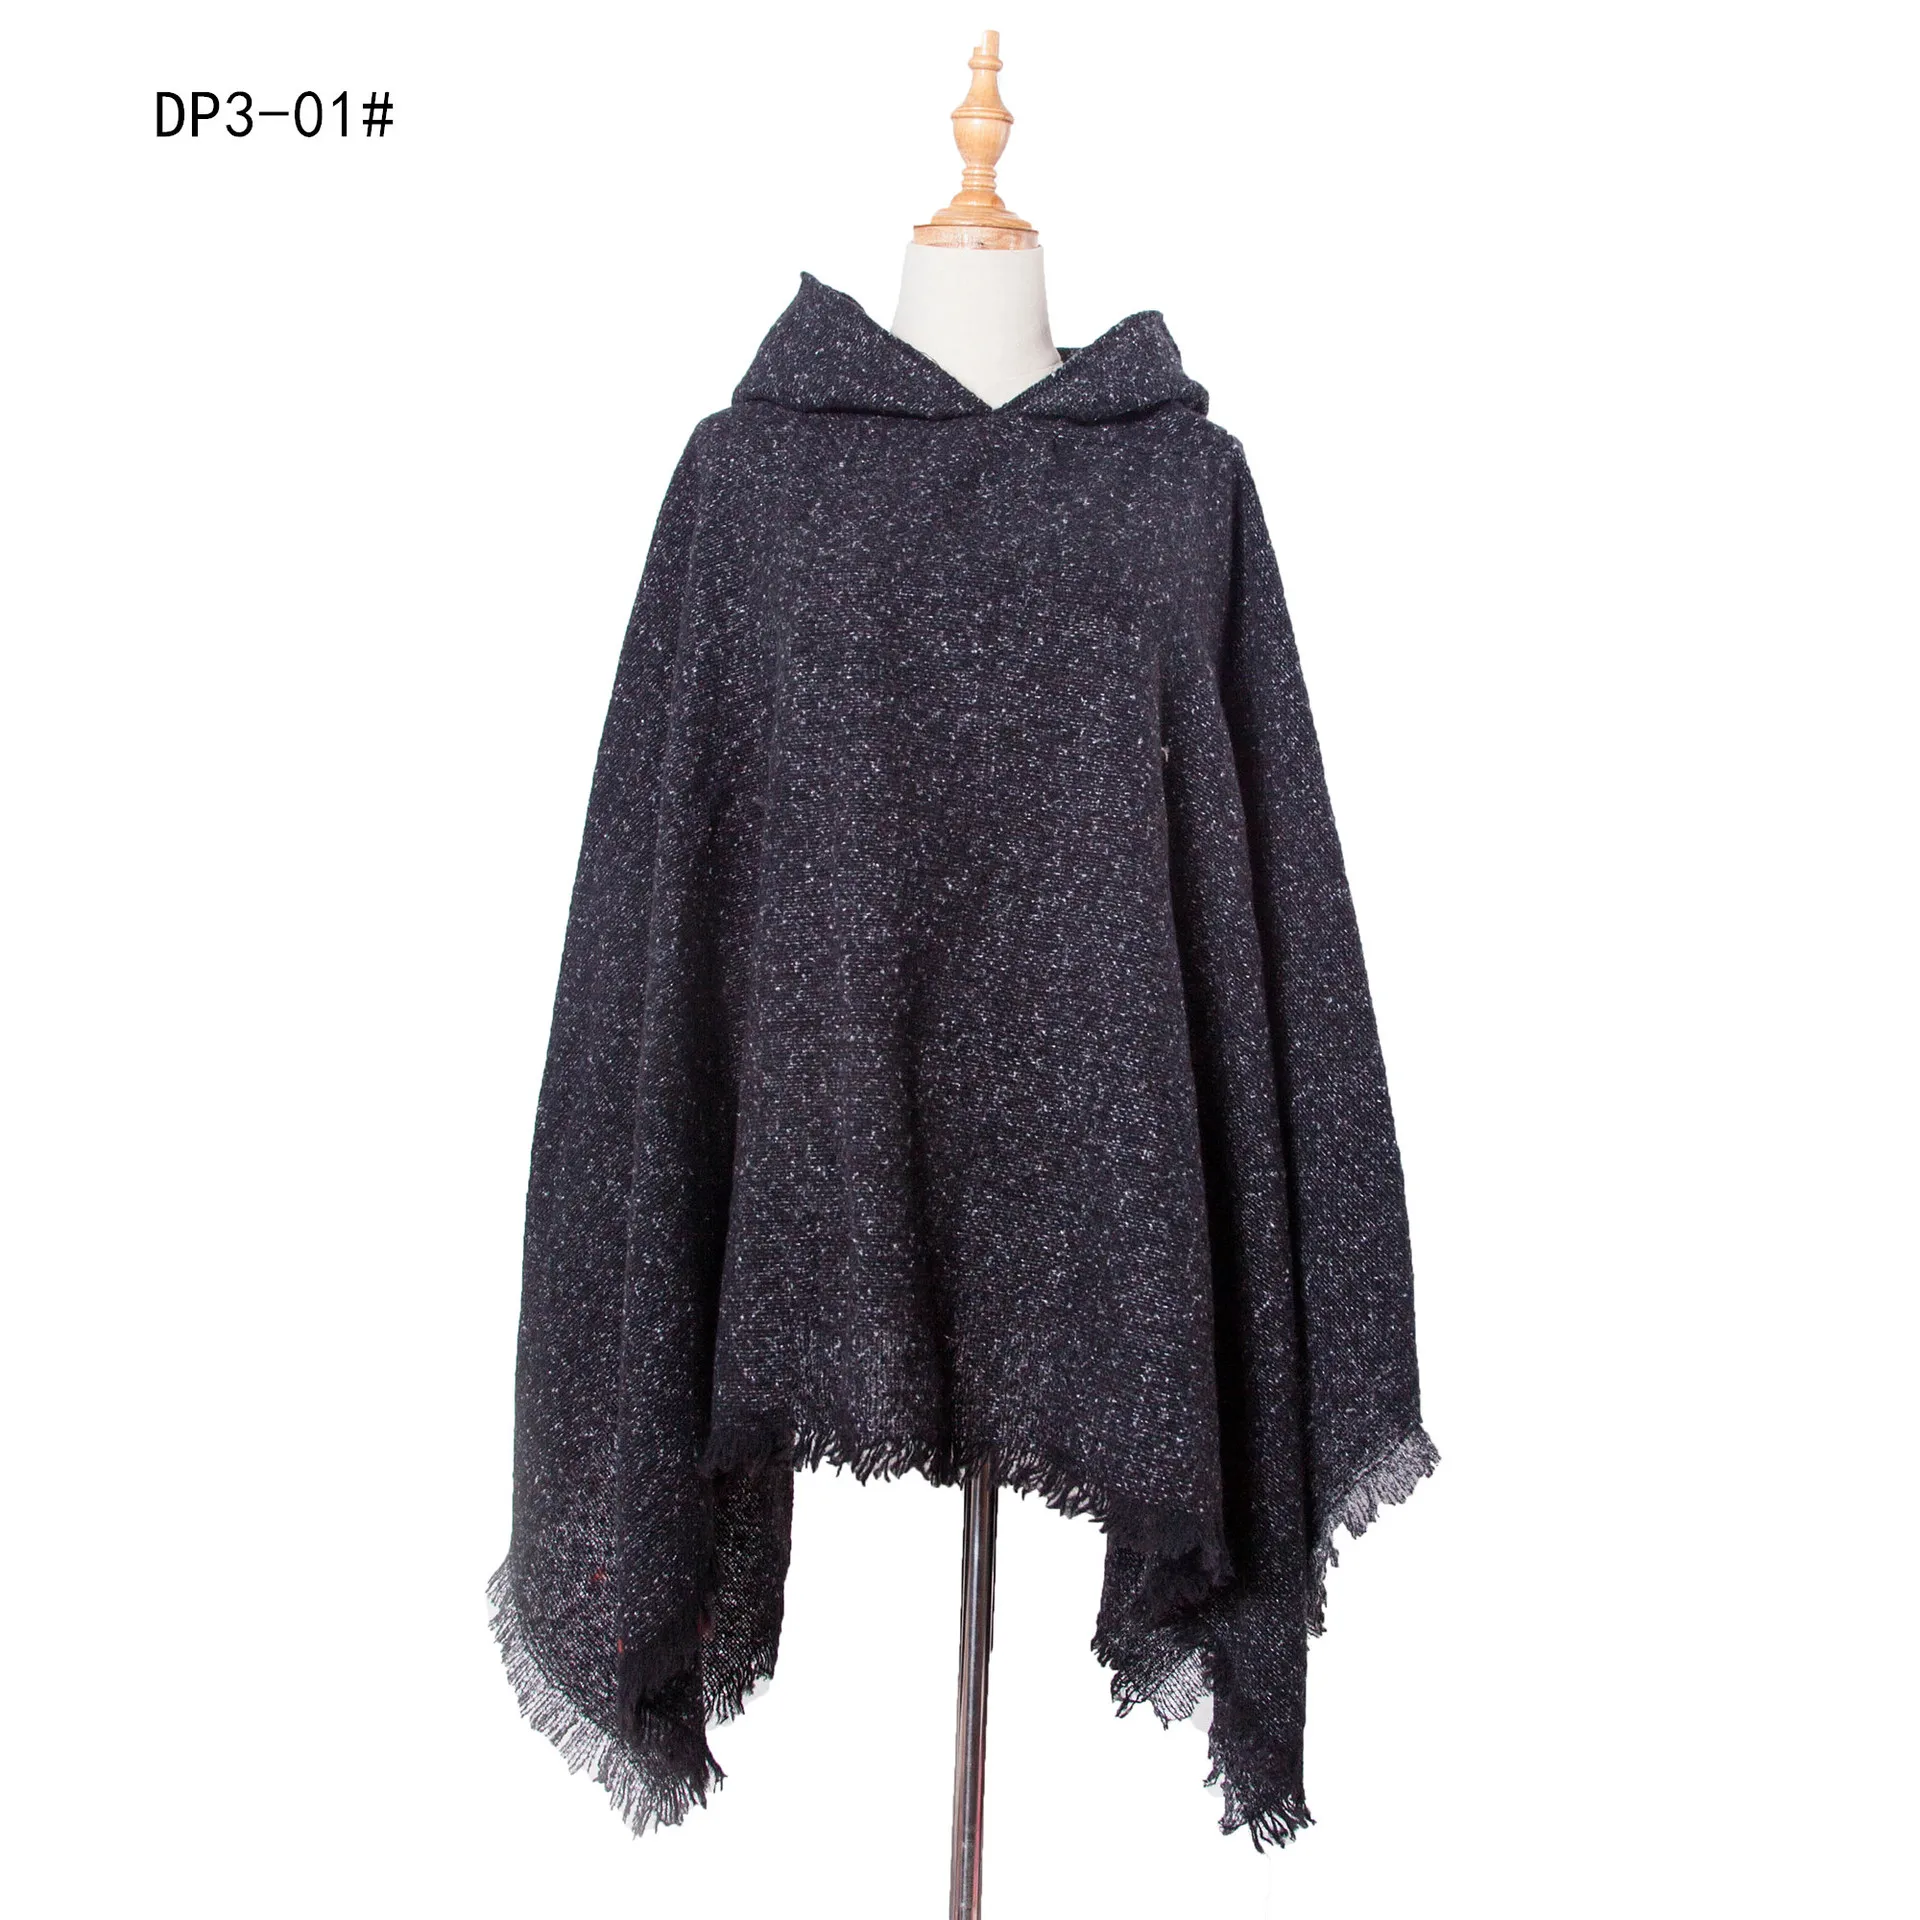 Autumn Winter New Loop Yarn Hooded Pullover Tourism Solid Color Cape Women Fashion Street Poncho Lady Capes Black Cloaks